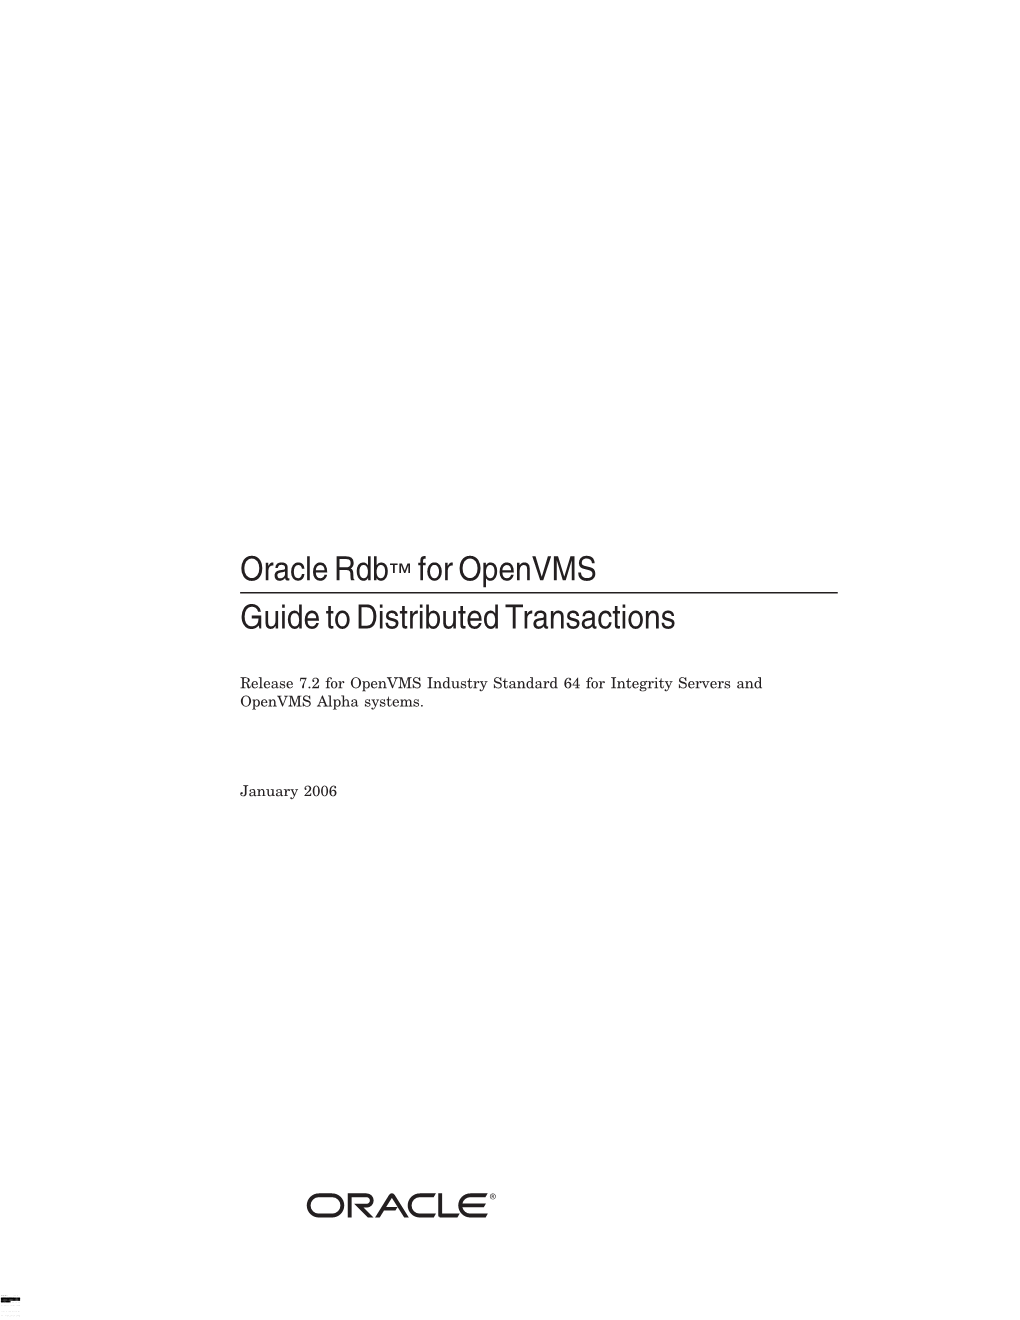 Oracle Rdb™ for Openvms Guide to Distributed Transactions